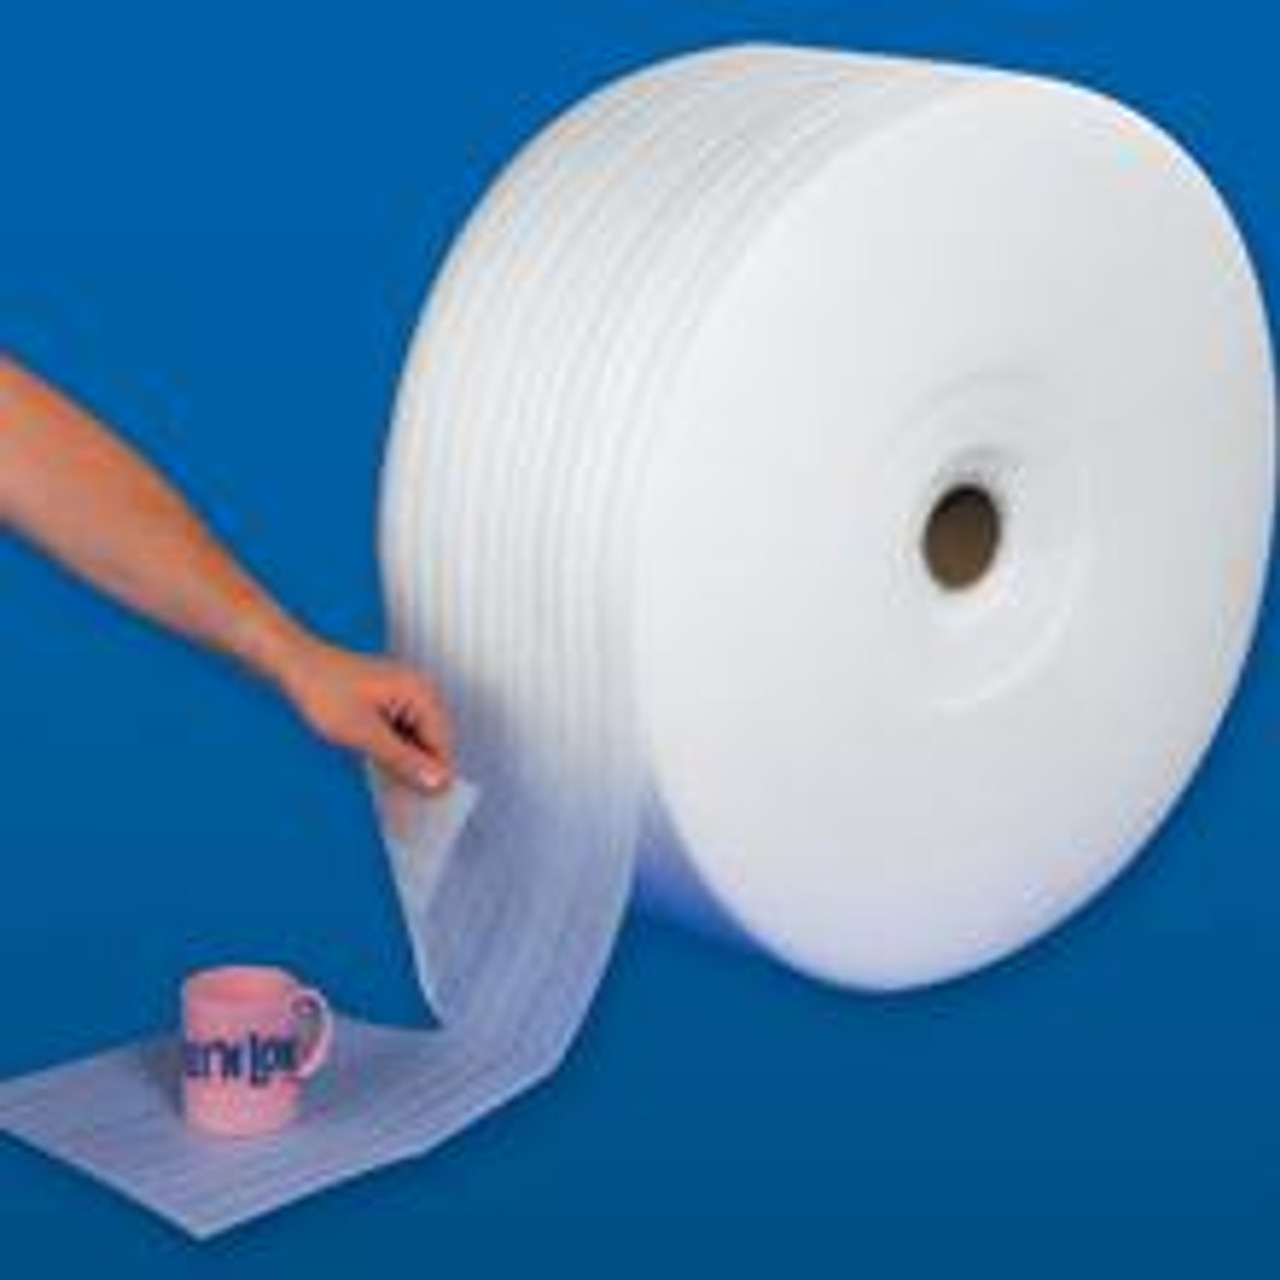 Foam Wrap Roll for Protecting Fragile Items 12x50 Ft 